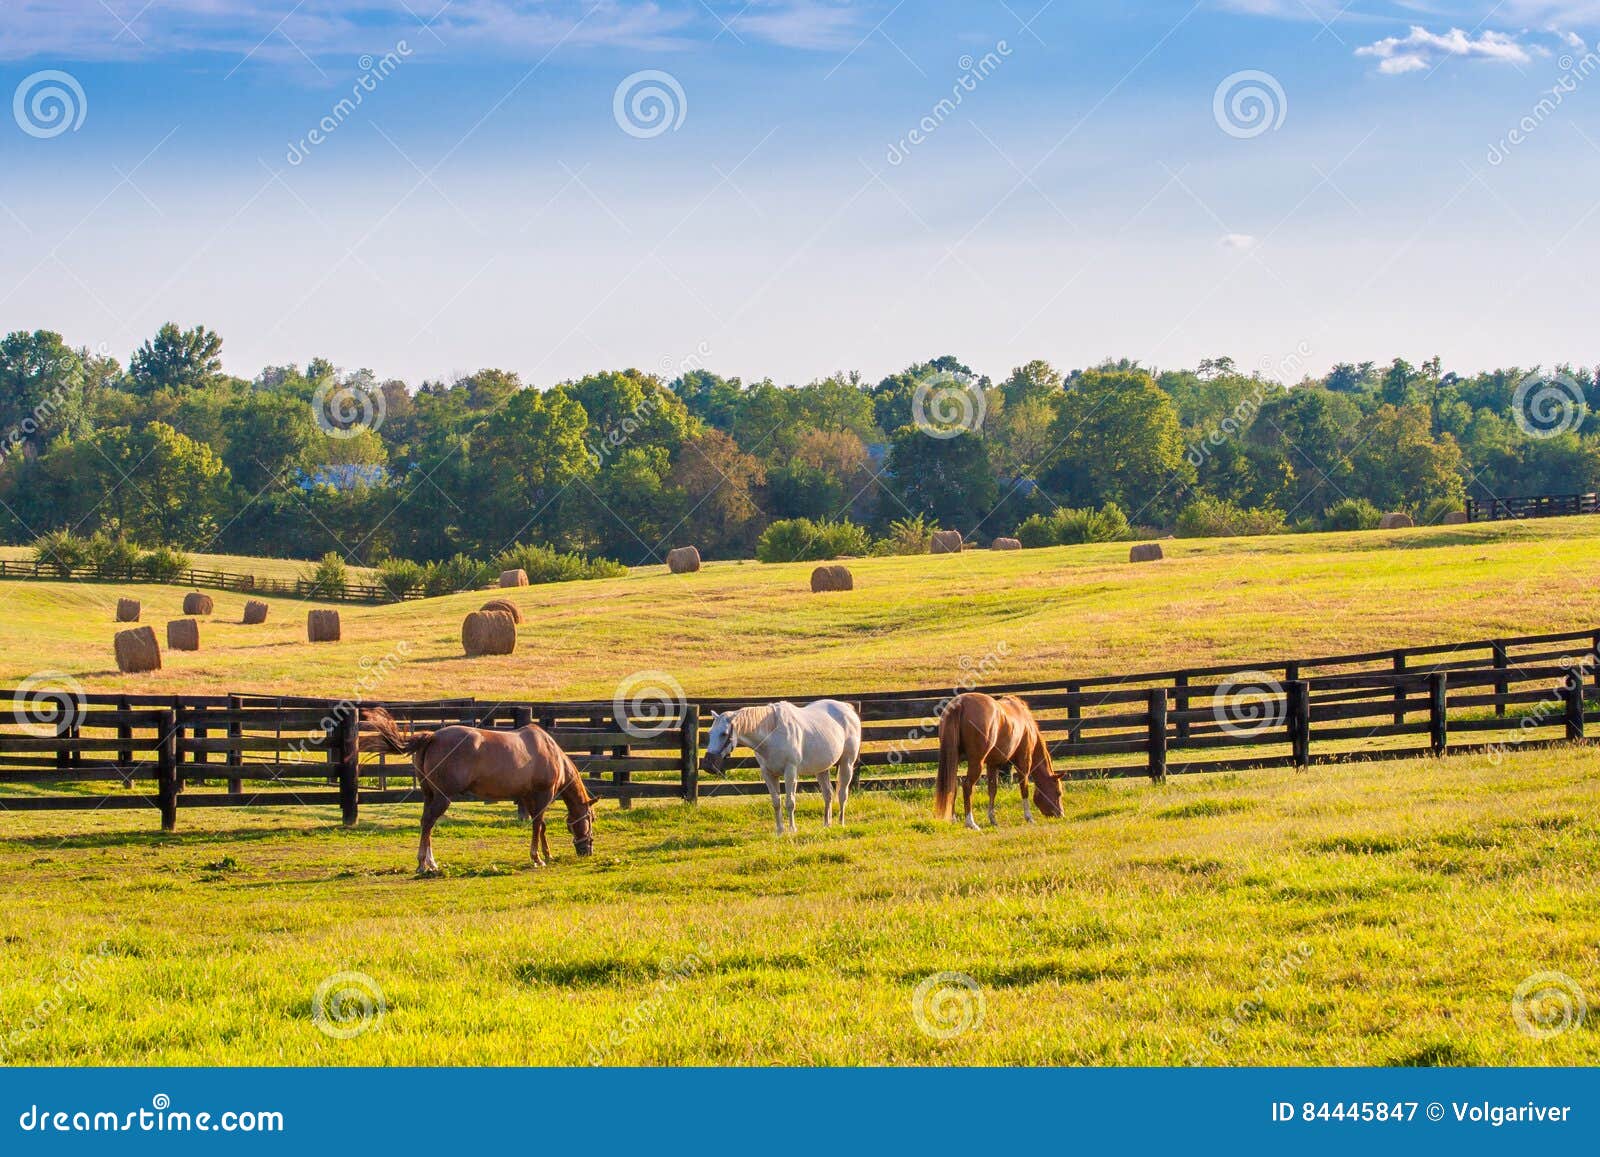 horses at horse farm. country summer landscape